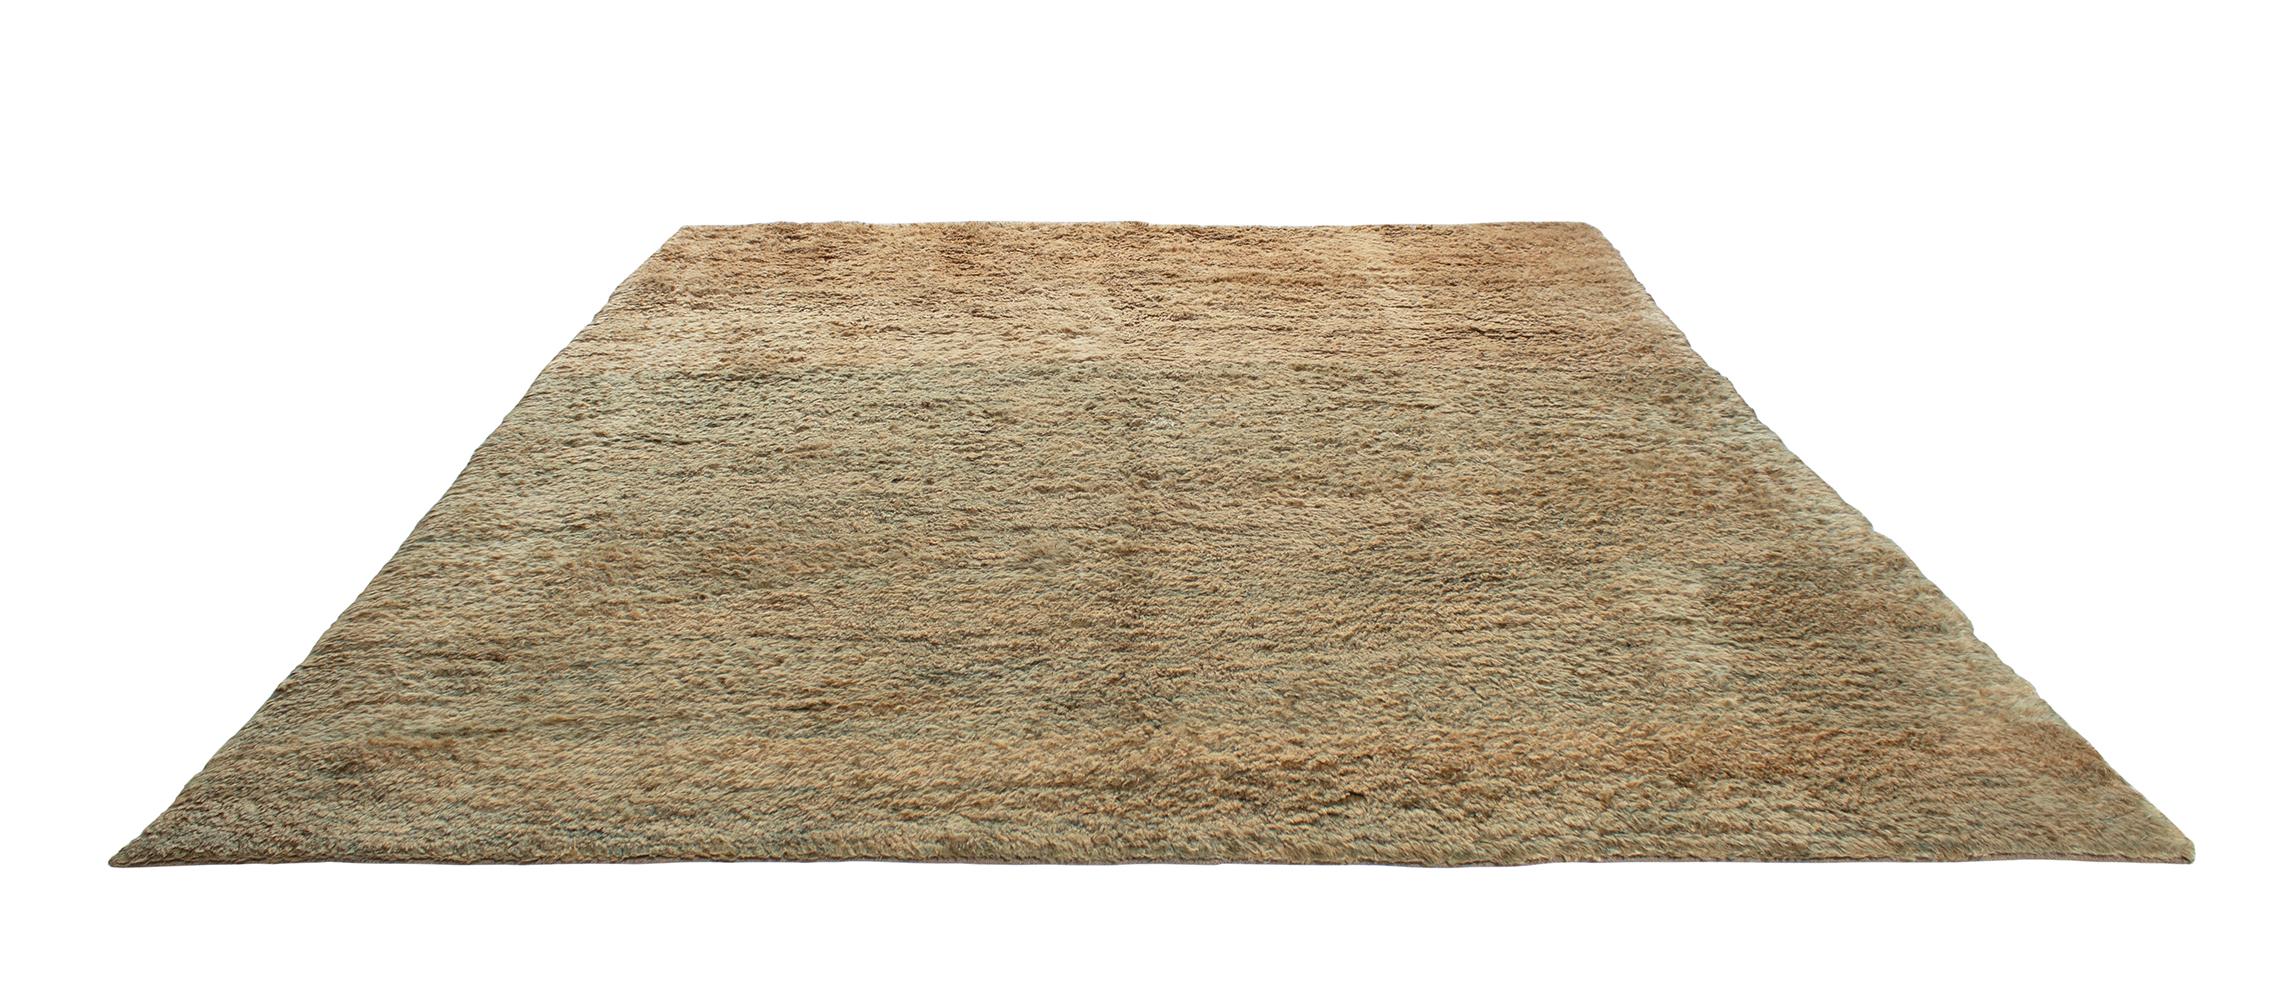 This shag rug is made with 100% handspun Persian wool with natural dyes. It is inspired by the vintage rugs that are native to the Shiraz region in Iran. Nasiri continues their rich tradition of rug making by applying the same techniques and methods